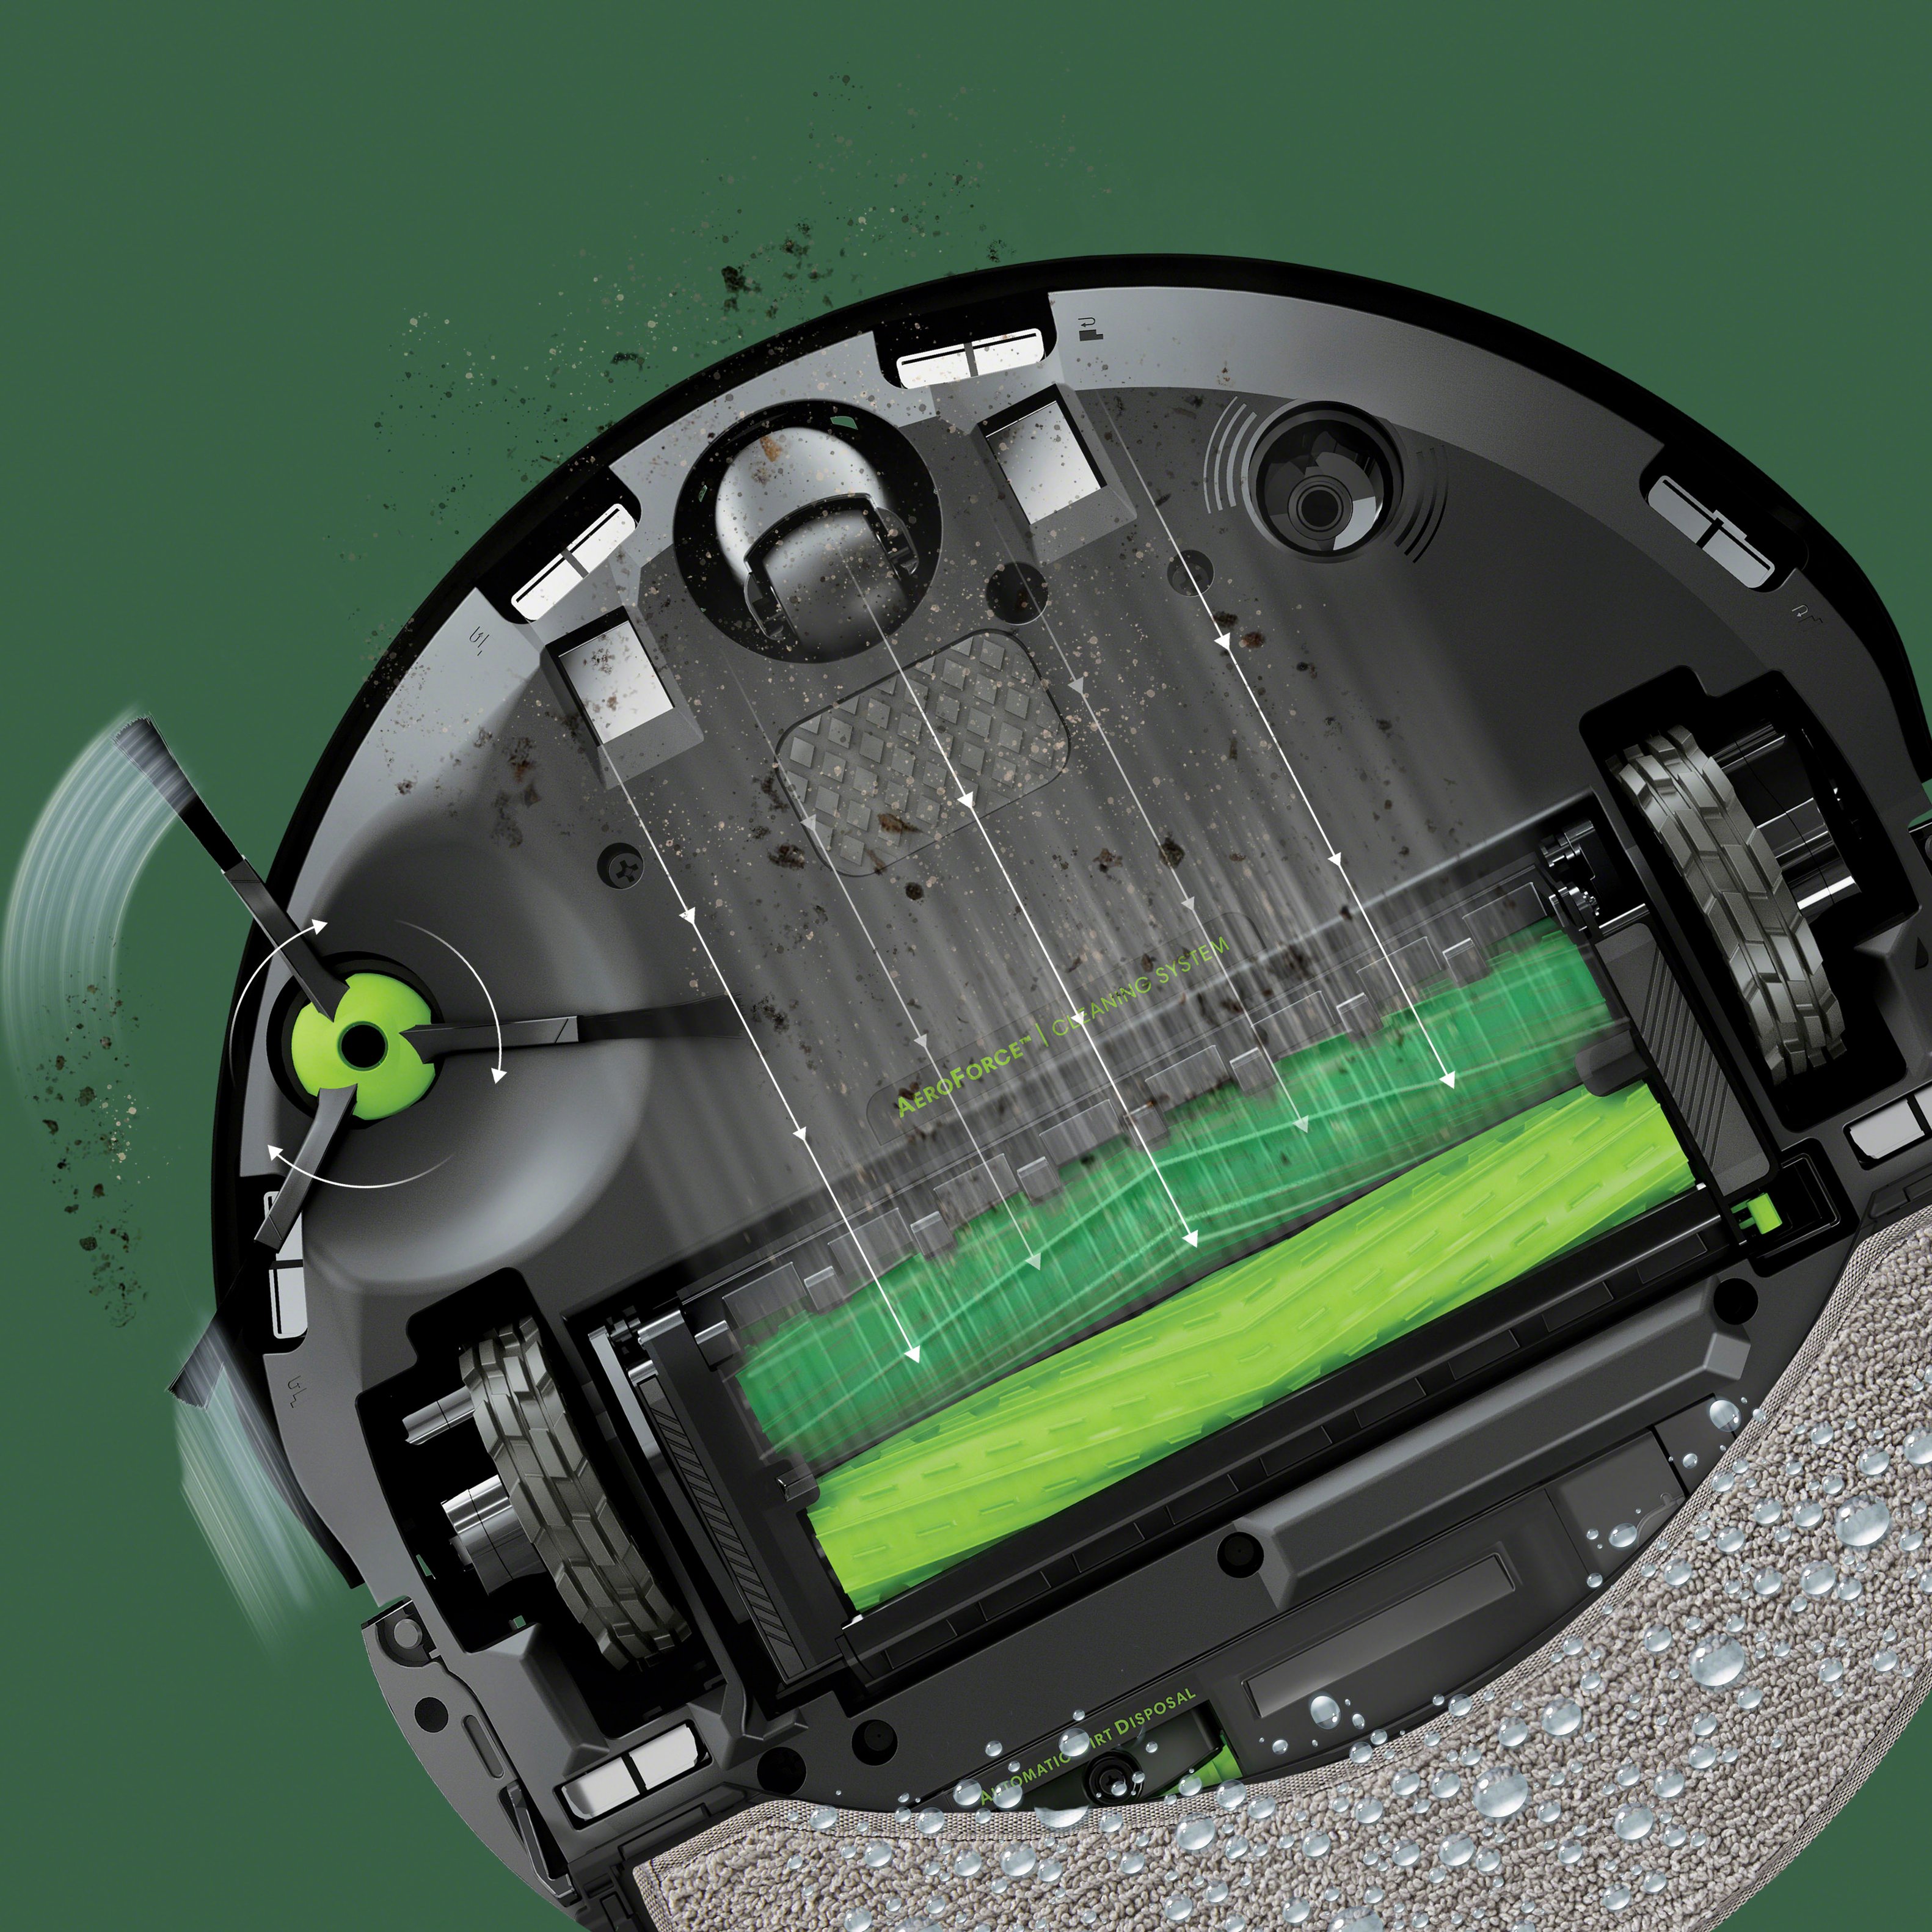 iRobot Roomba Combo j7+ Self-Emptying Robot Vacuum & Mop - Automatically  Vacuums and Mops, Fully Retractable Mop pad, Identifies & Avoids Obstacles